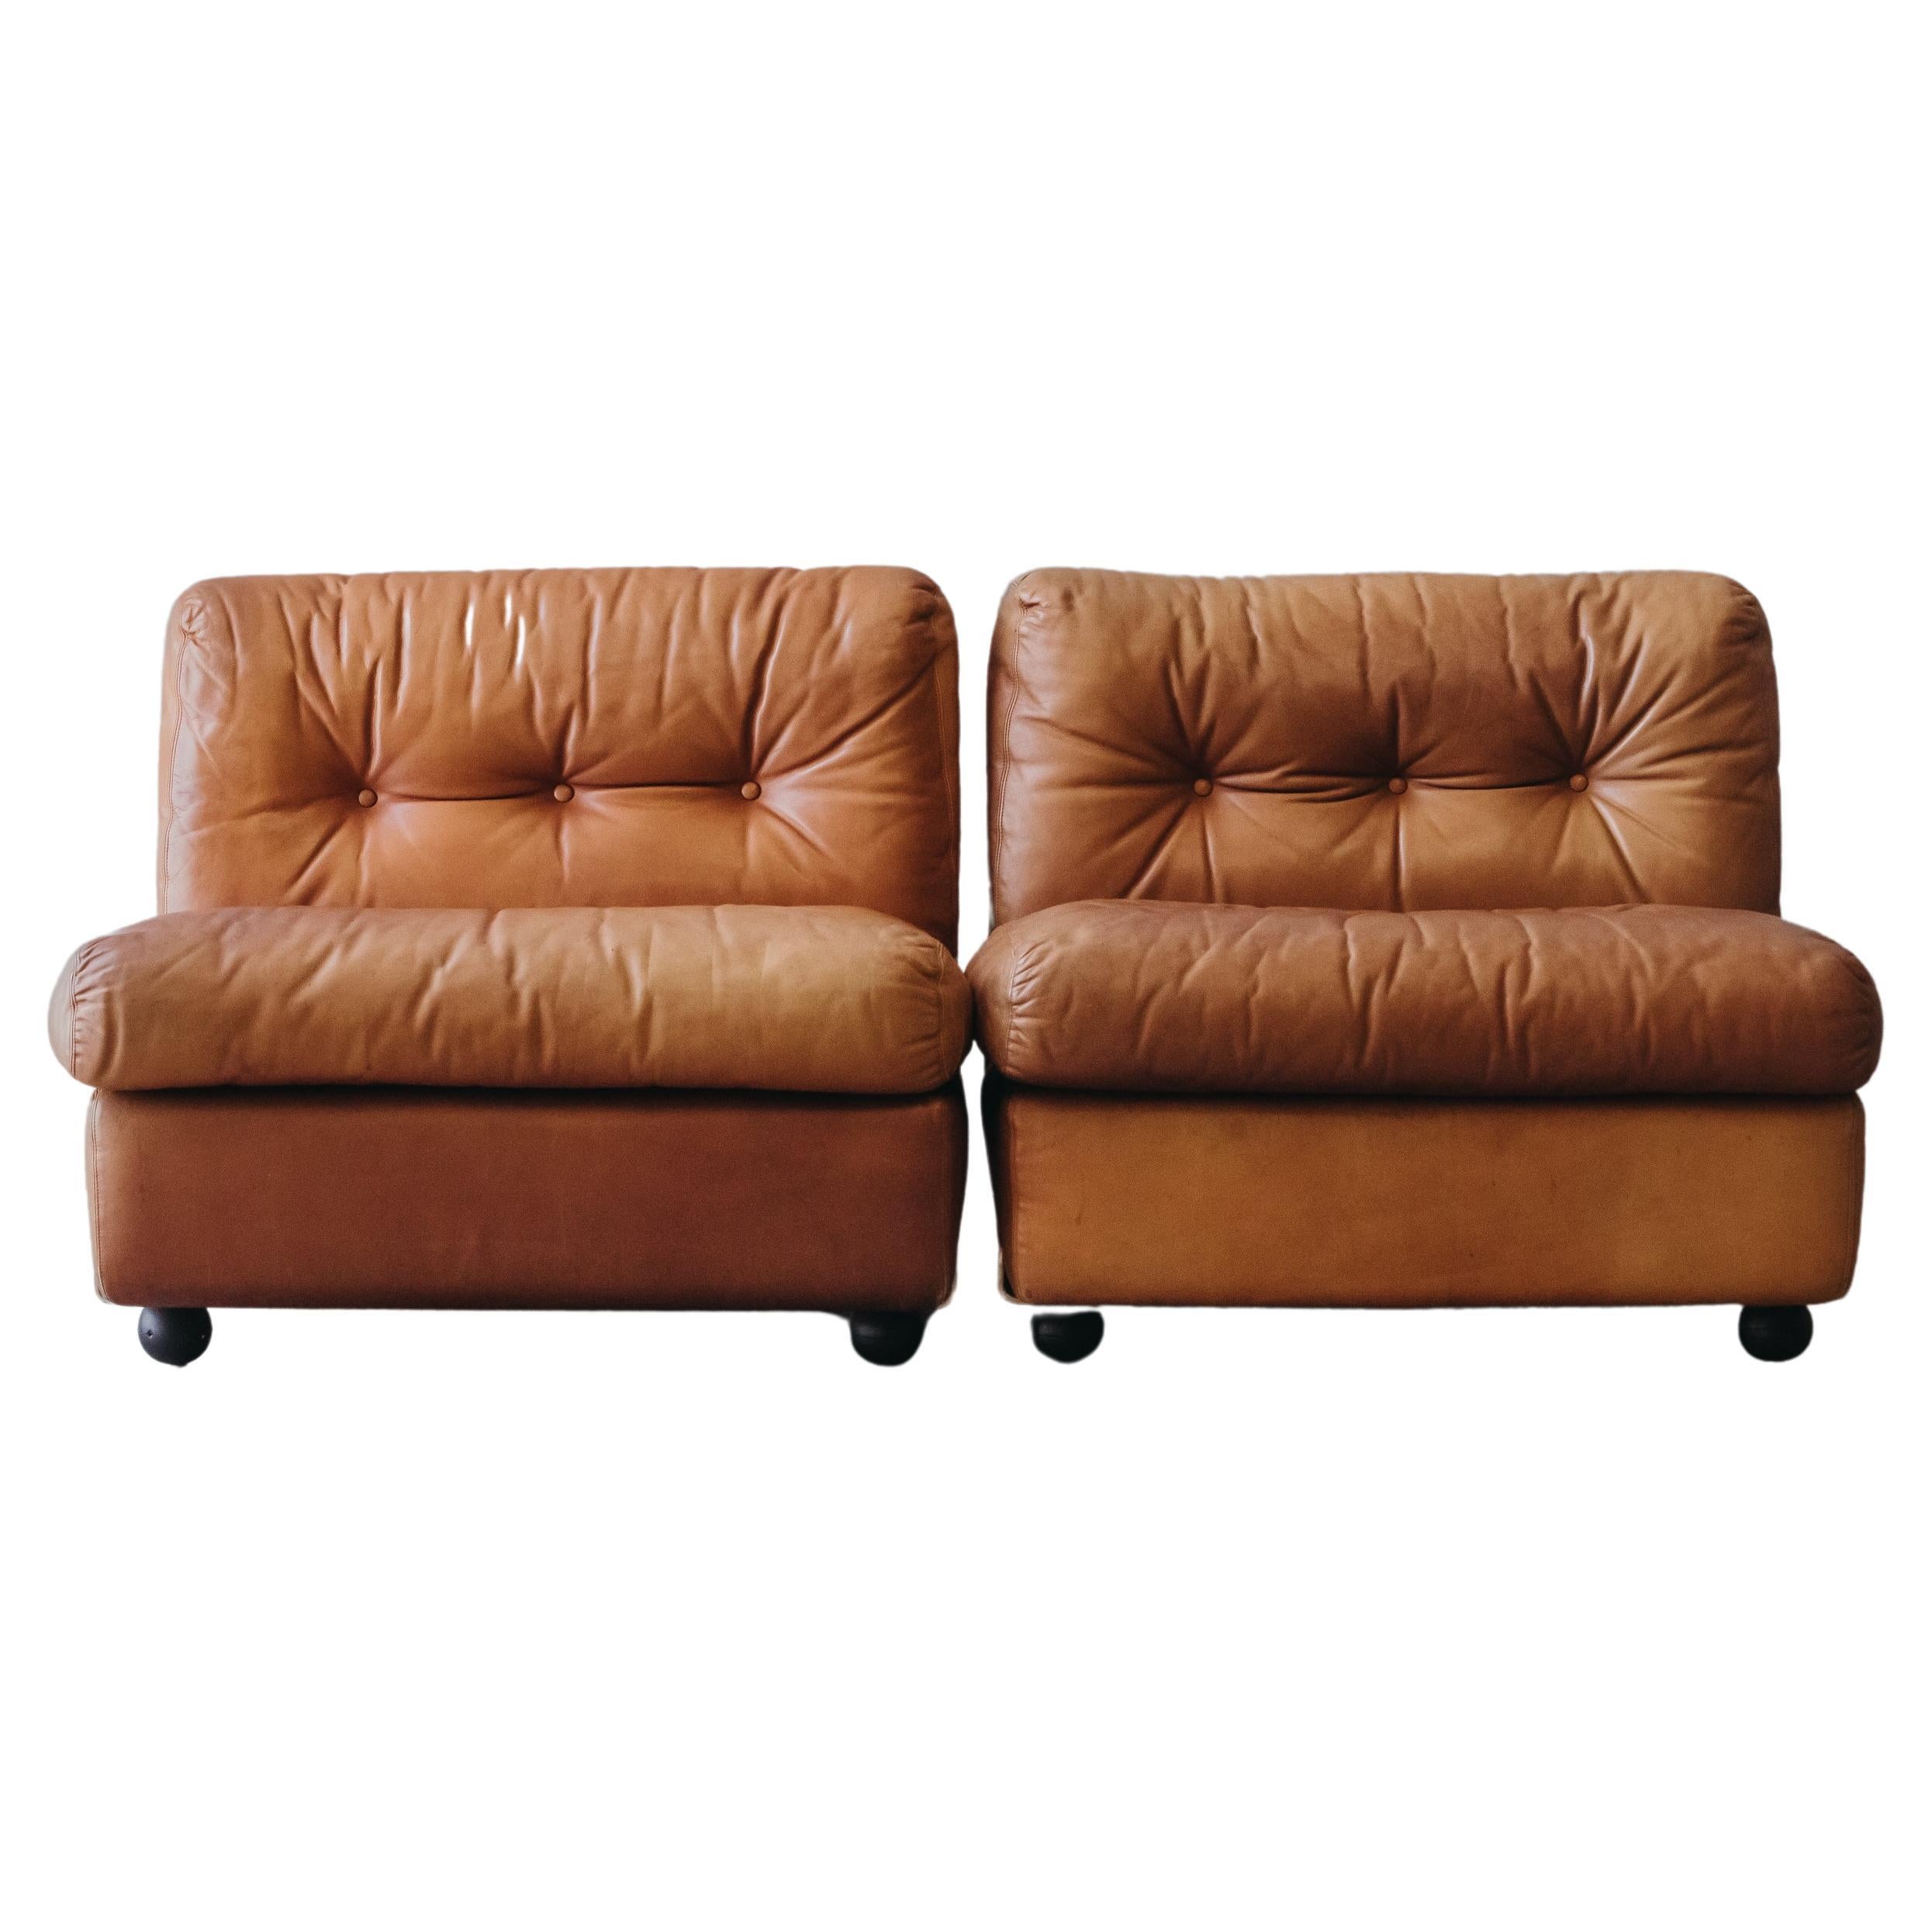 Vintage Pair of Leather Lounge Chairs by Mario Bellini, Italy, circa 1970 For Sale